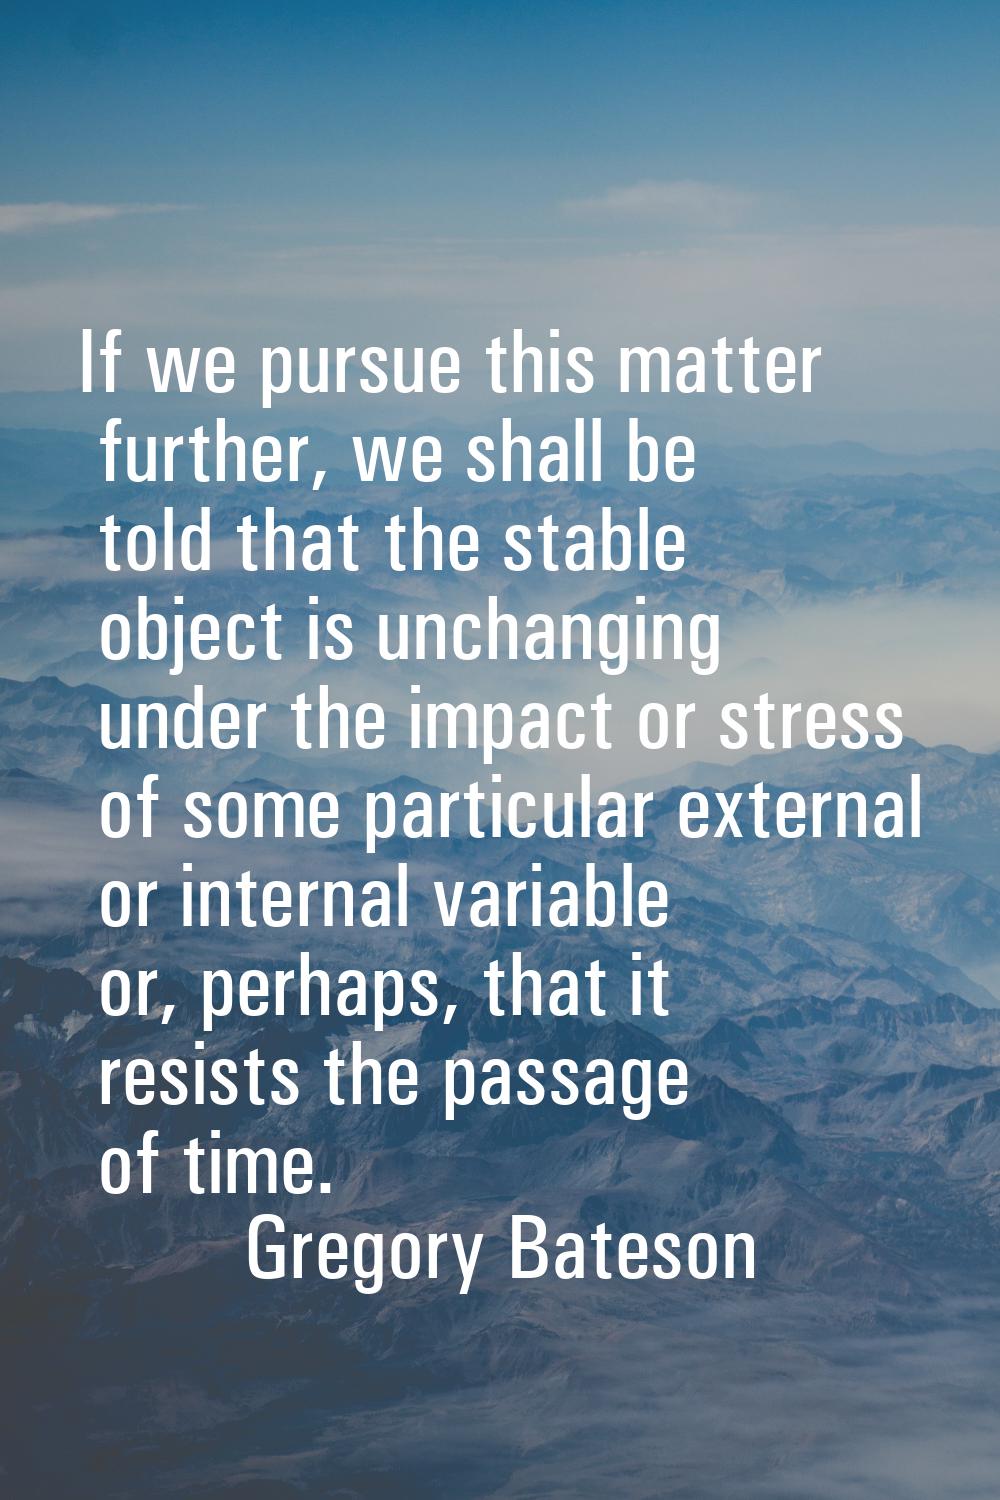 If we pursue this matter further, we shall be told that the stable object is unchanging under the i